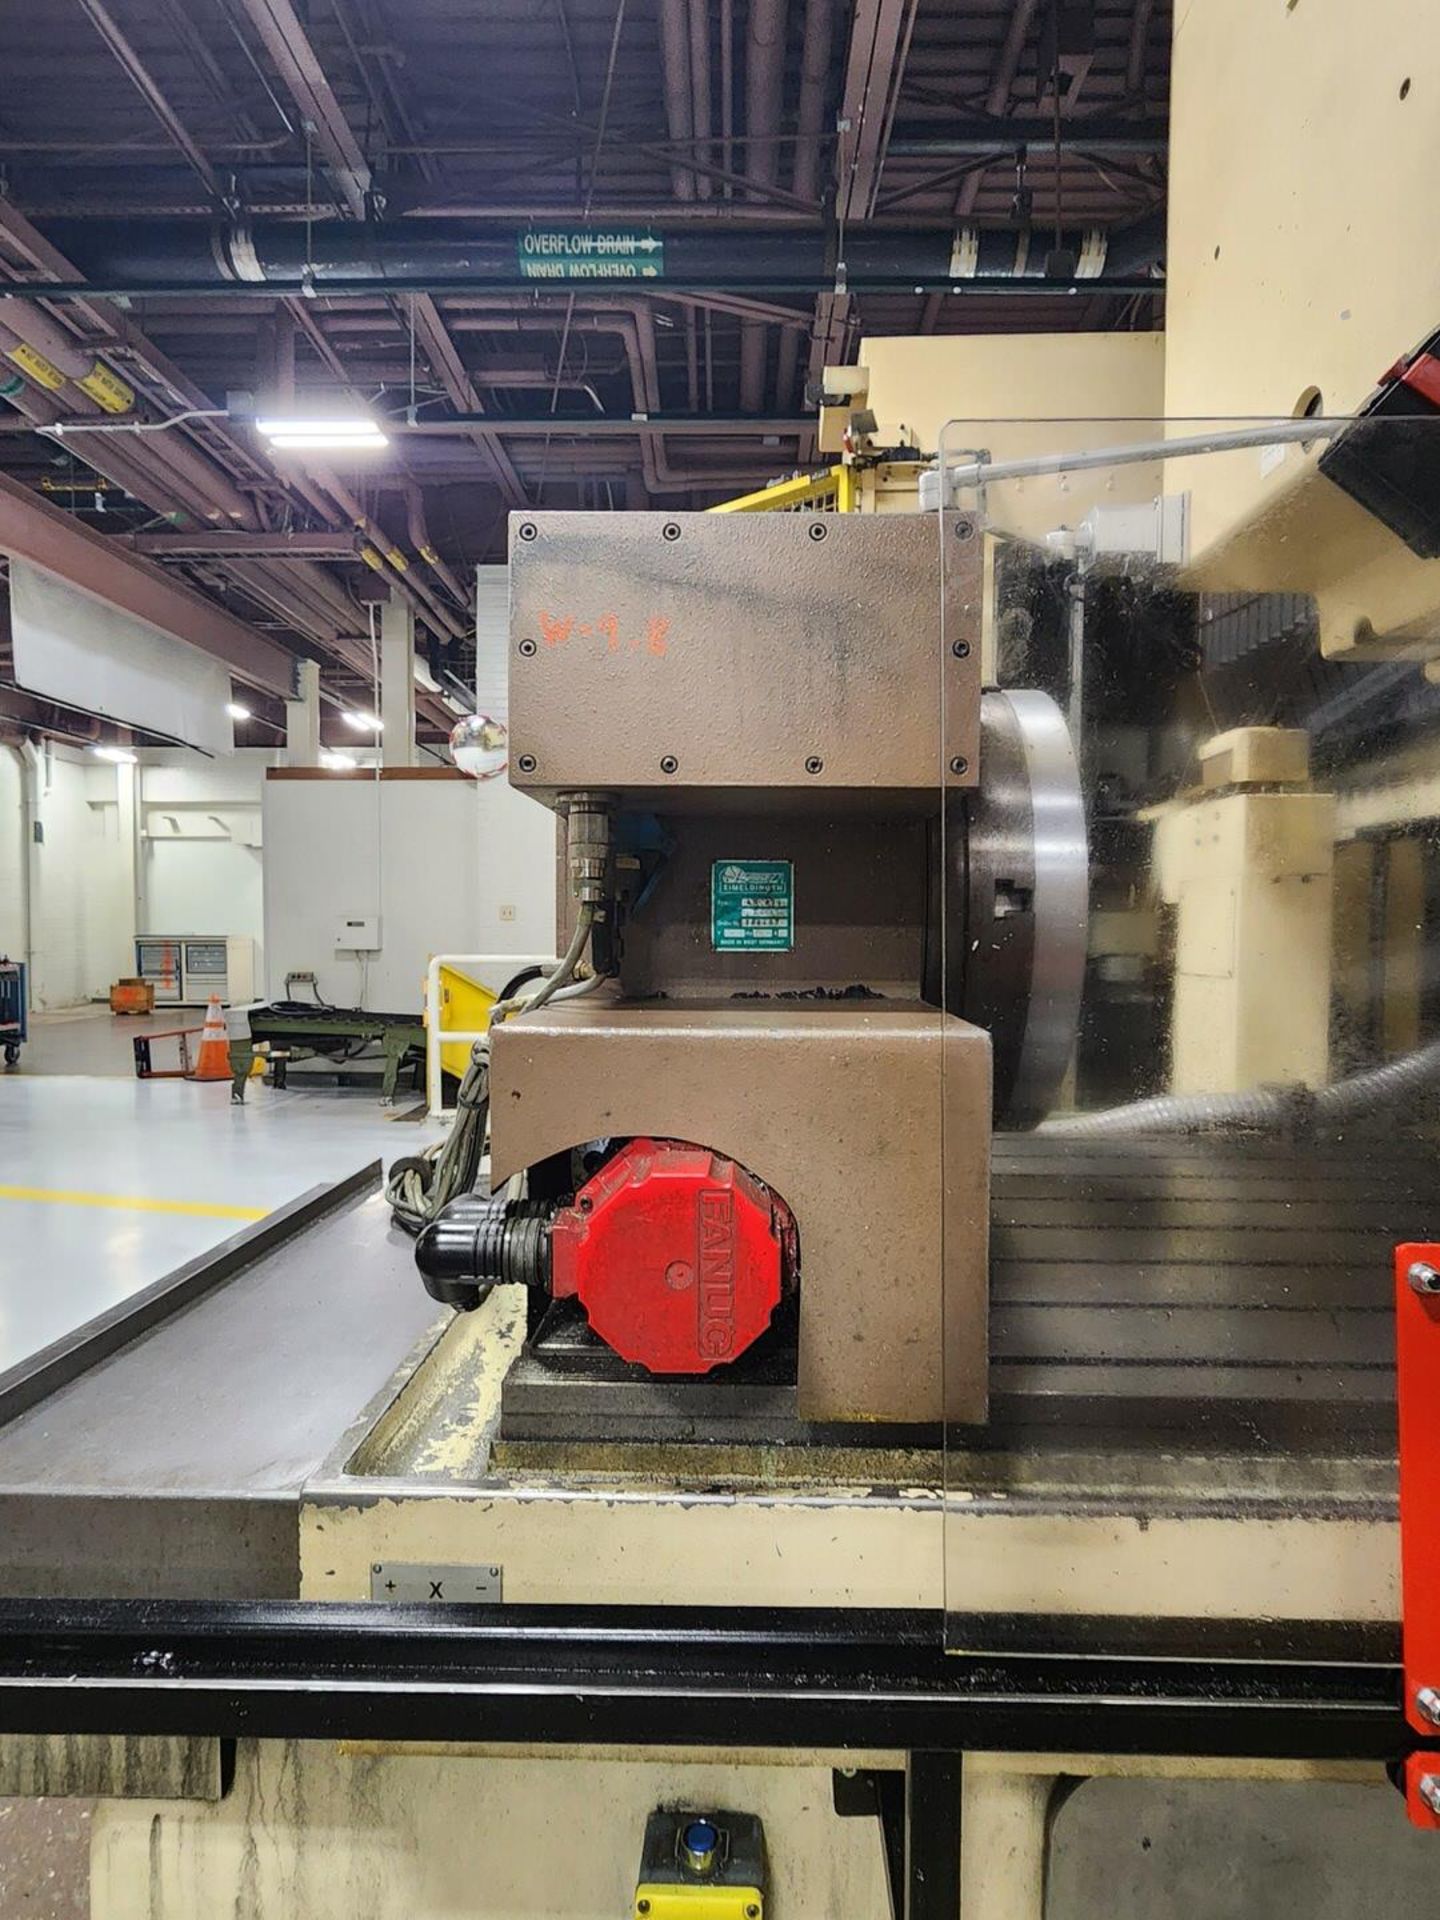 SIP SIP-640 Jig Boring Machine W/ Fanuc Series 16i-M Controller; Cutting Time: 15,304hrs - Image 15 of 36